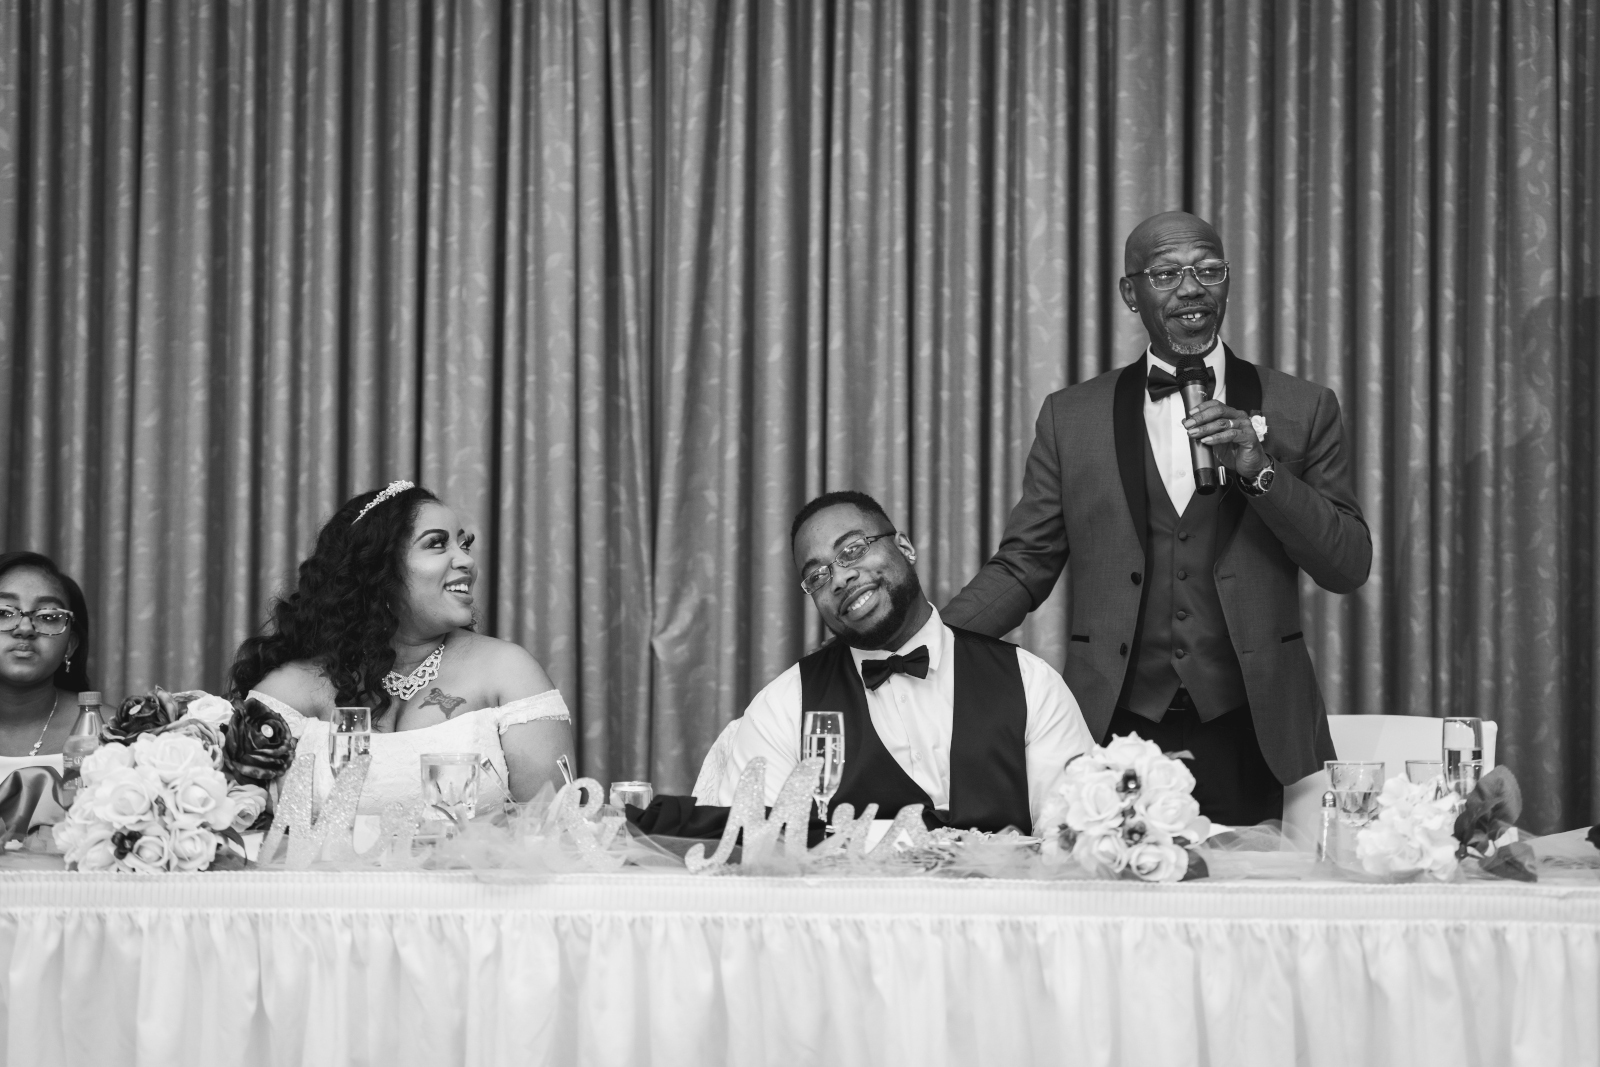 Wedding speech, wedding toast, father of the groom wedding speech, bride and groom laughing, classic wedding photo, black and white, beautiful couple, African American bride, African American wedding, romantic wedding reception at Hilton Akron/Fairlawn